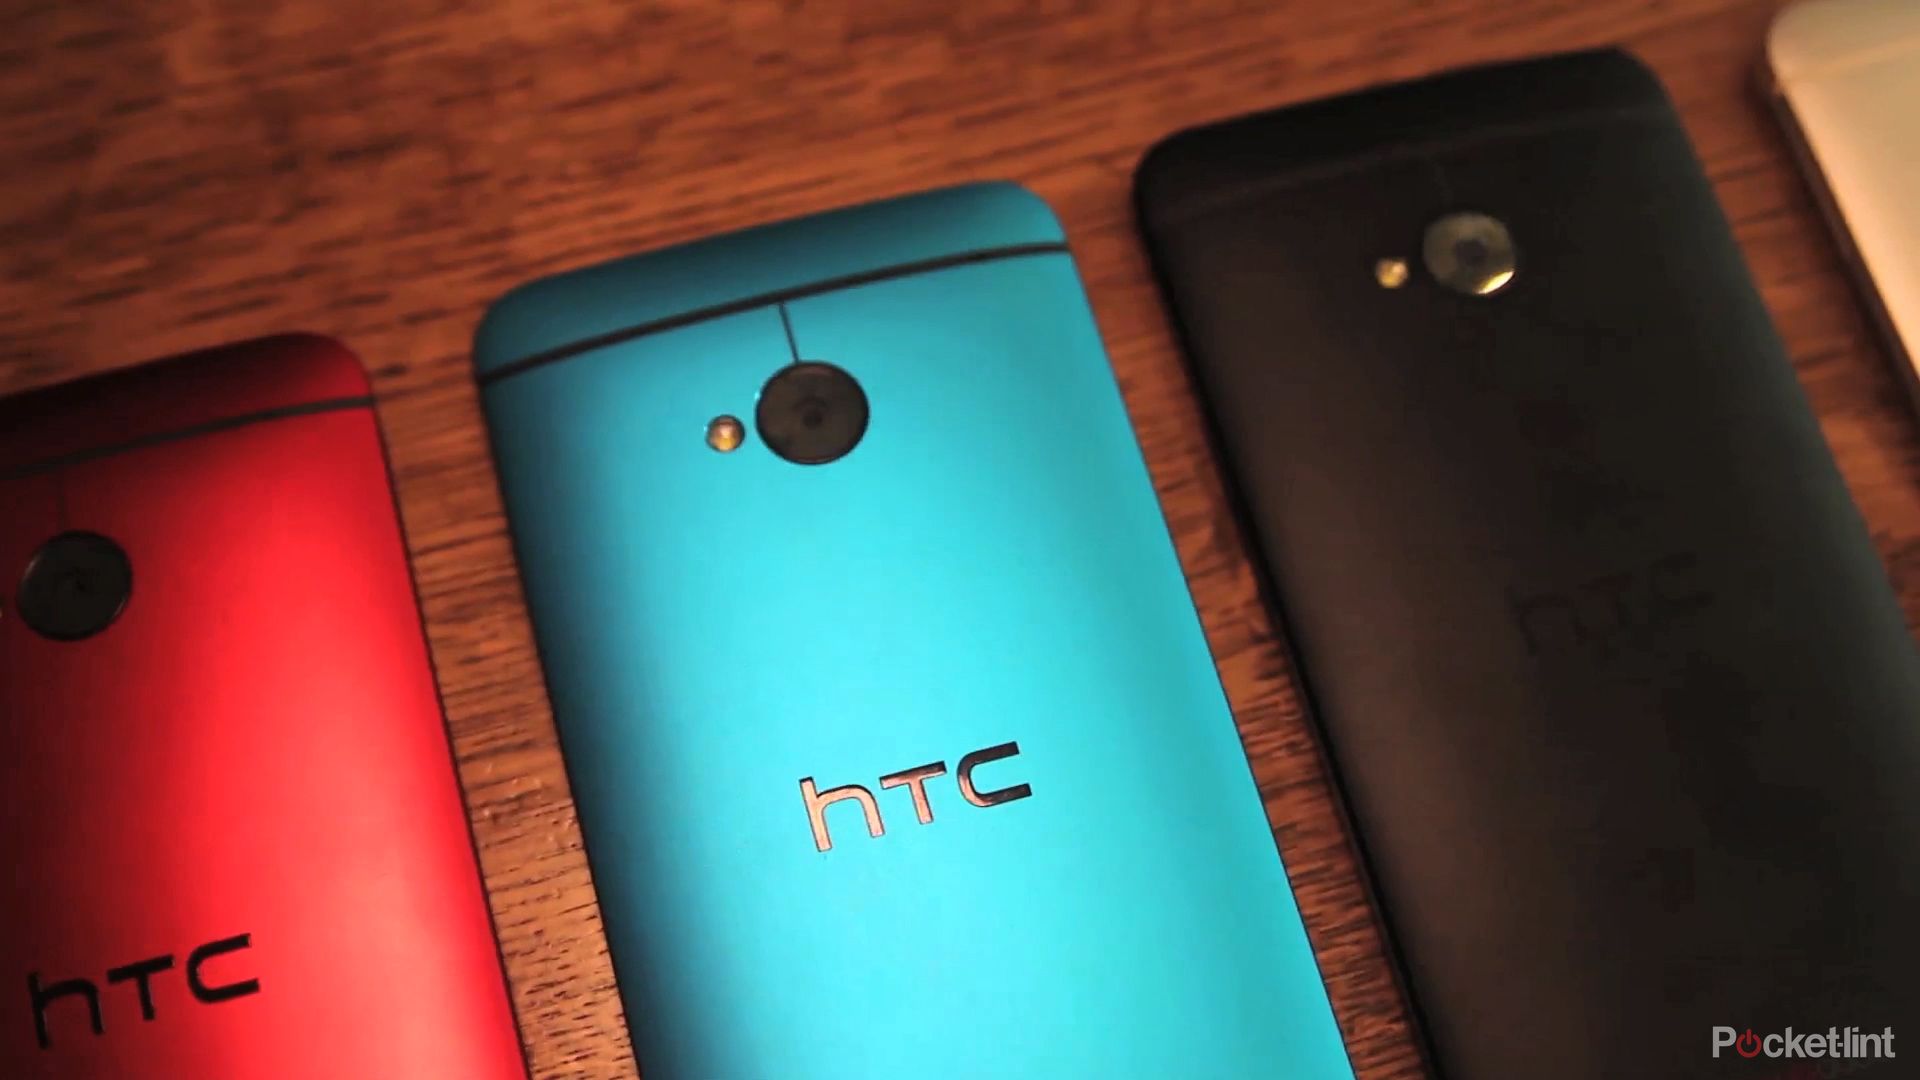 htc in takeover talks with lenovo laptop maker rumoured to be acquiring phone firm image 1